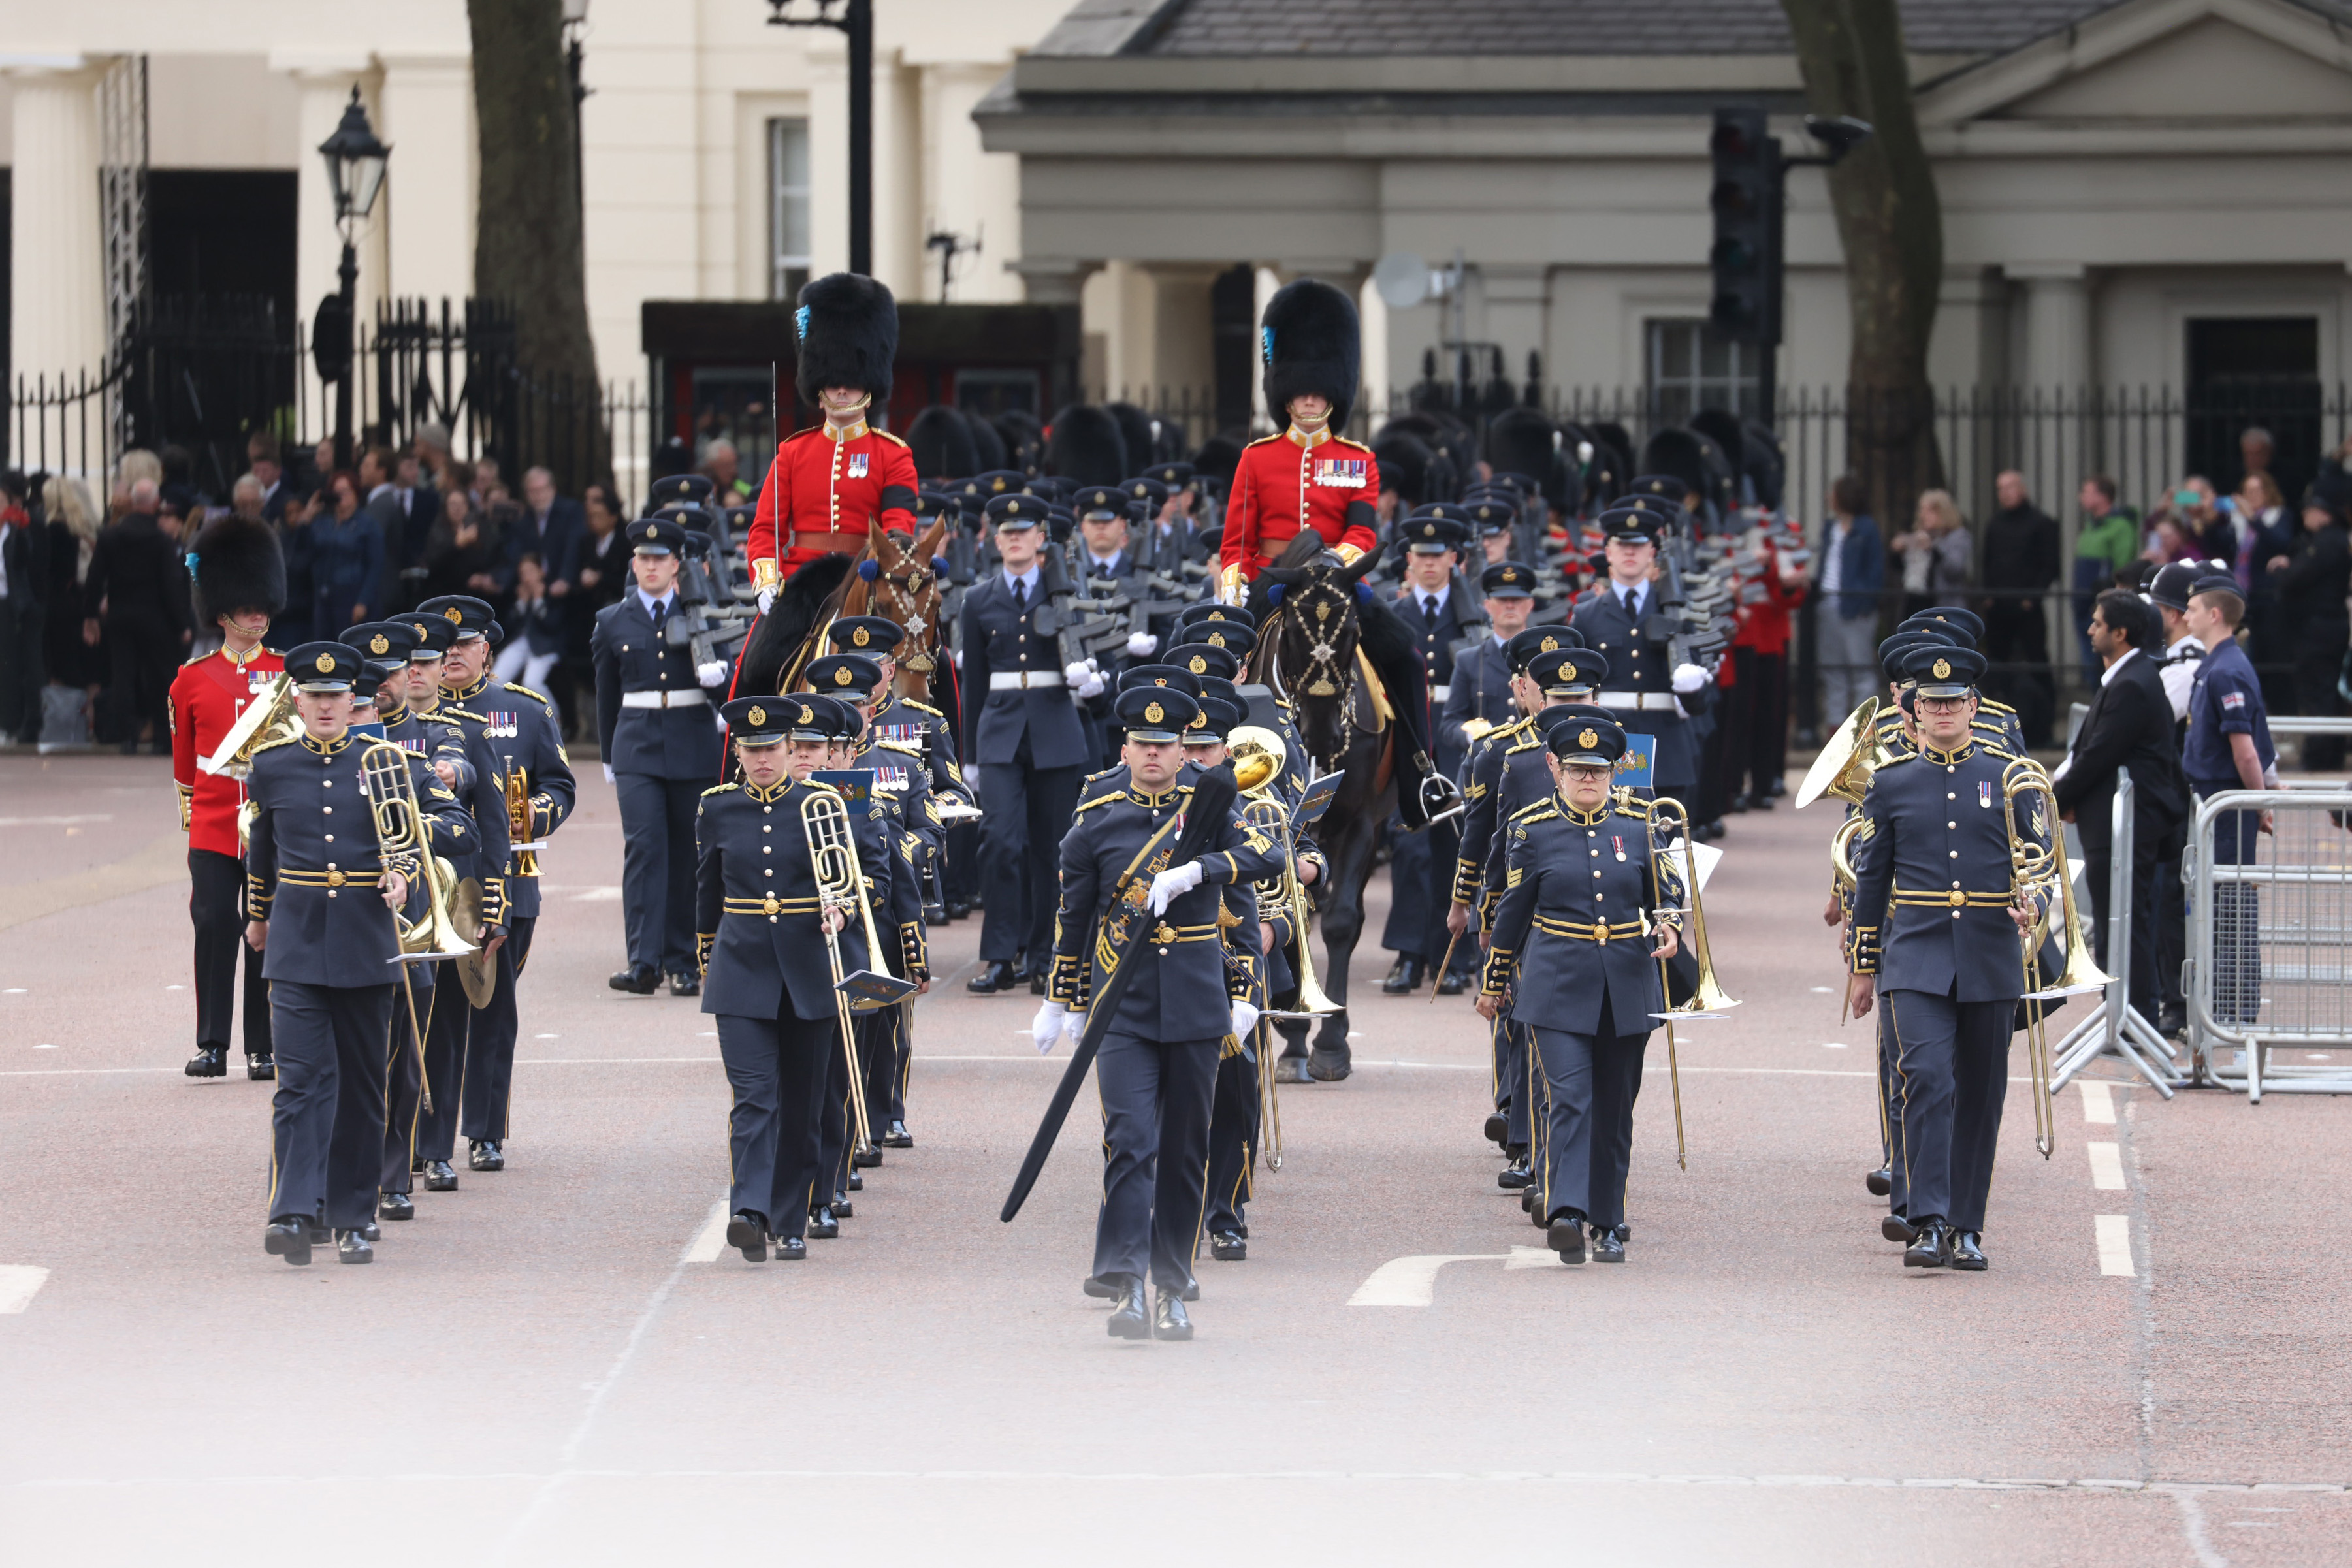 Image shows RAF Musicians and guards on parade.